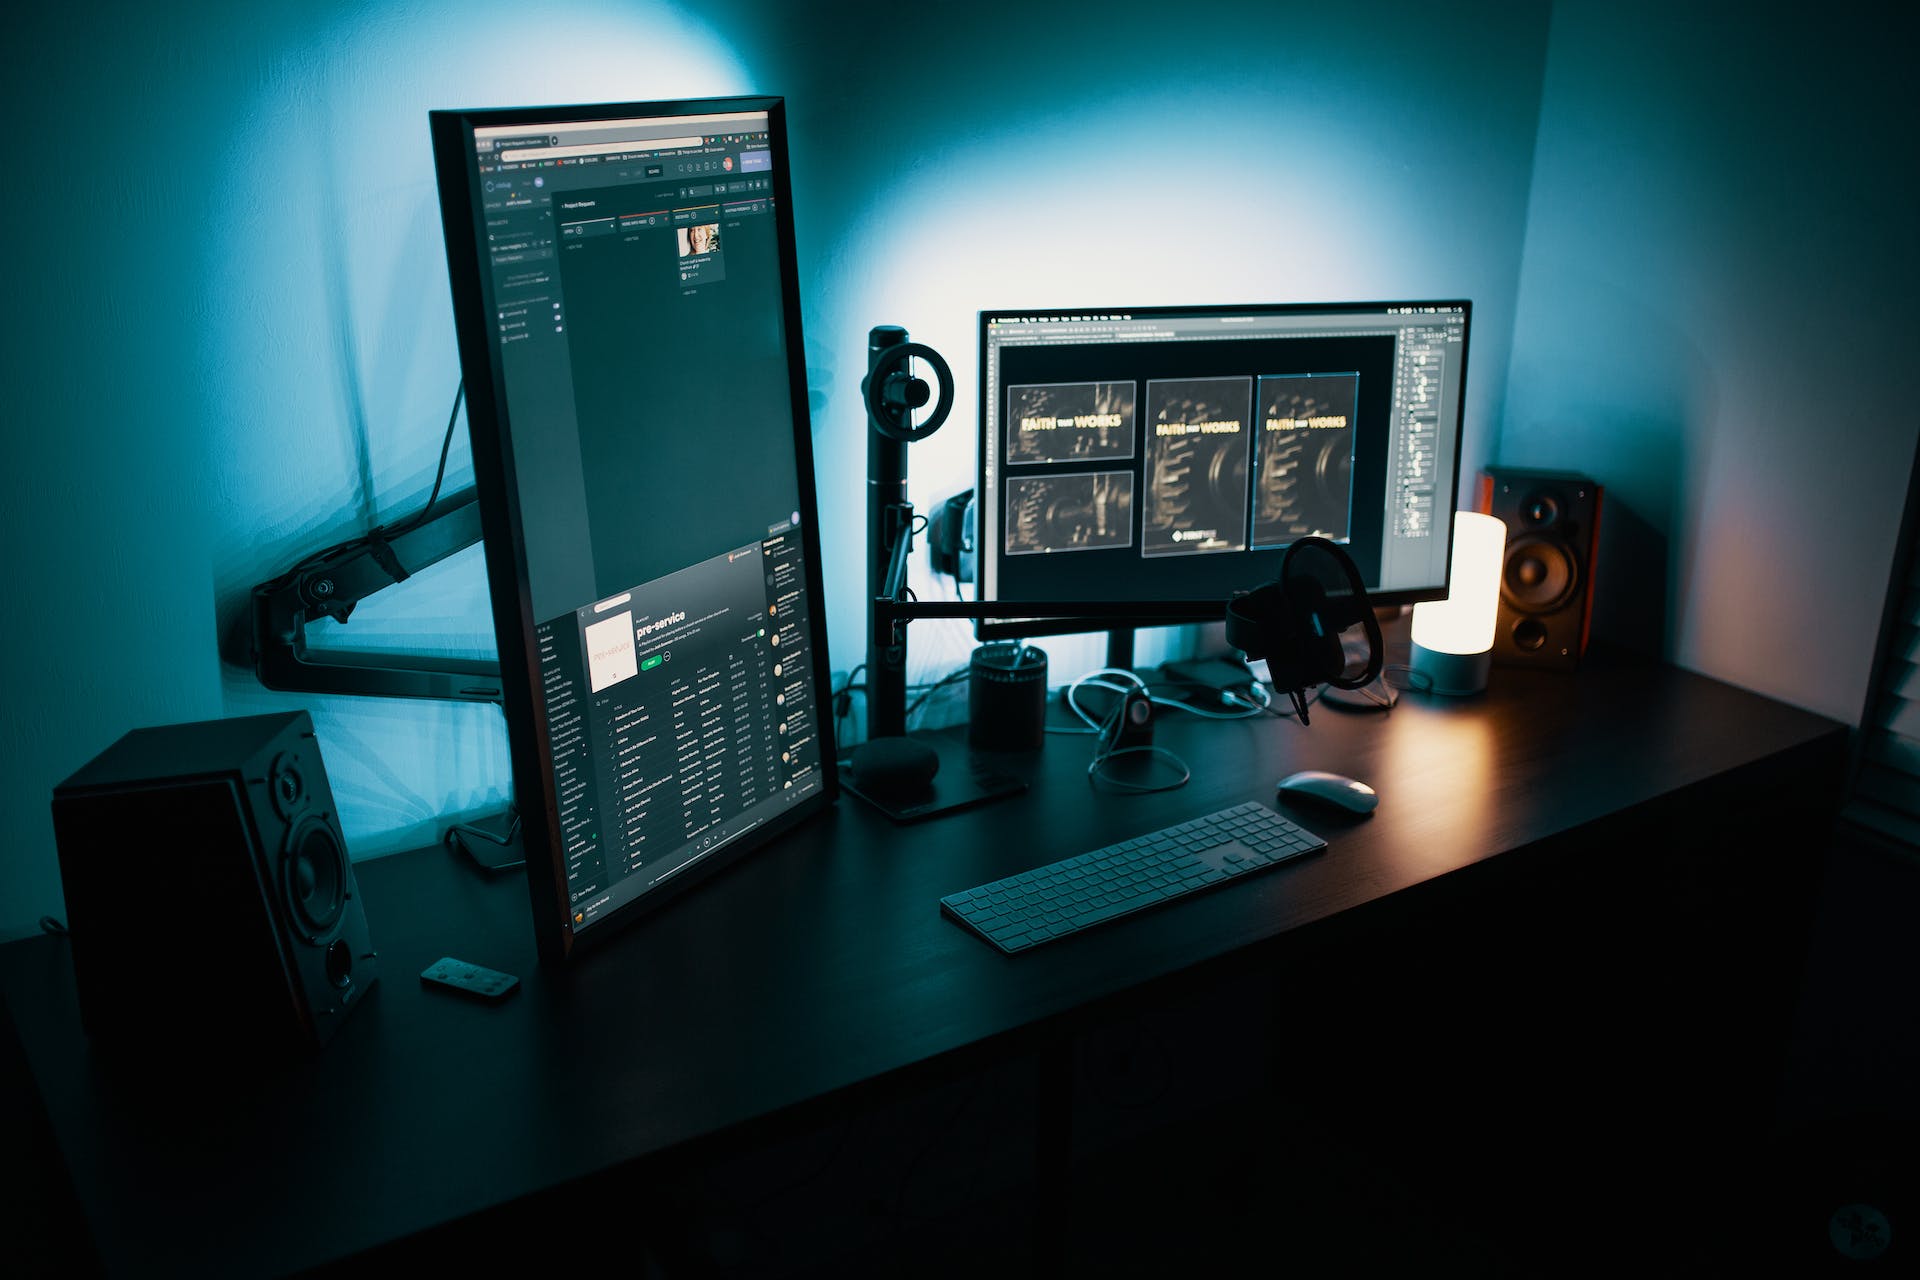 Dark room with multiple monitors on a desk